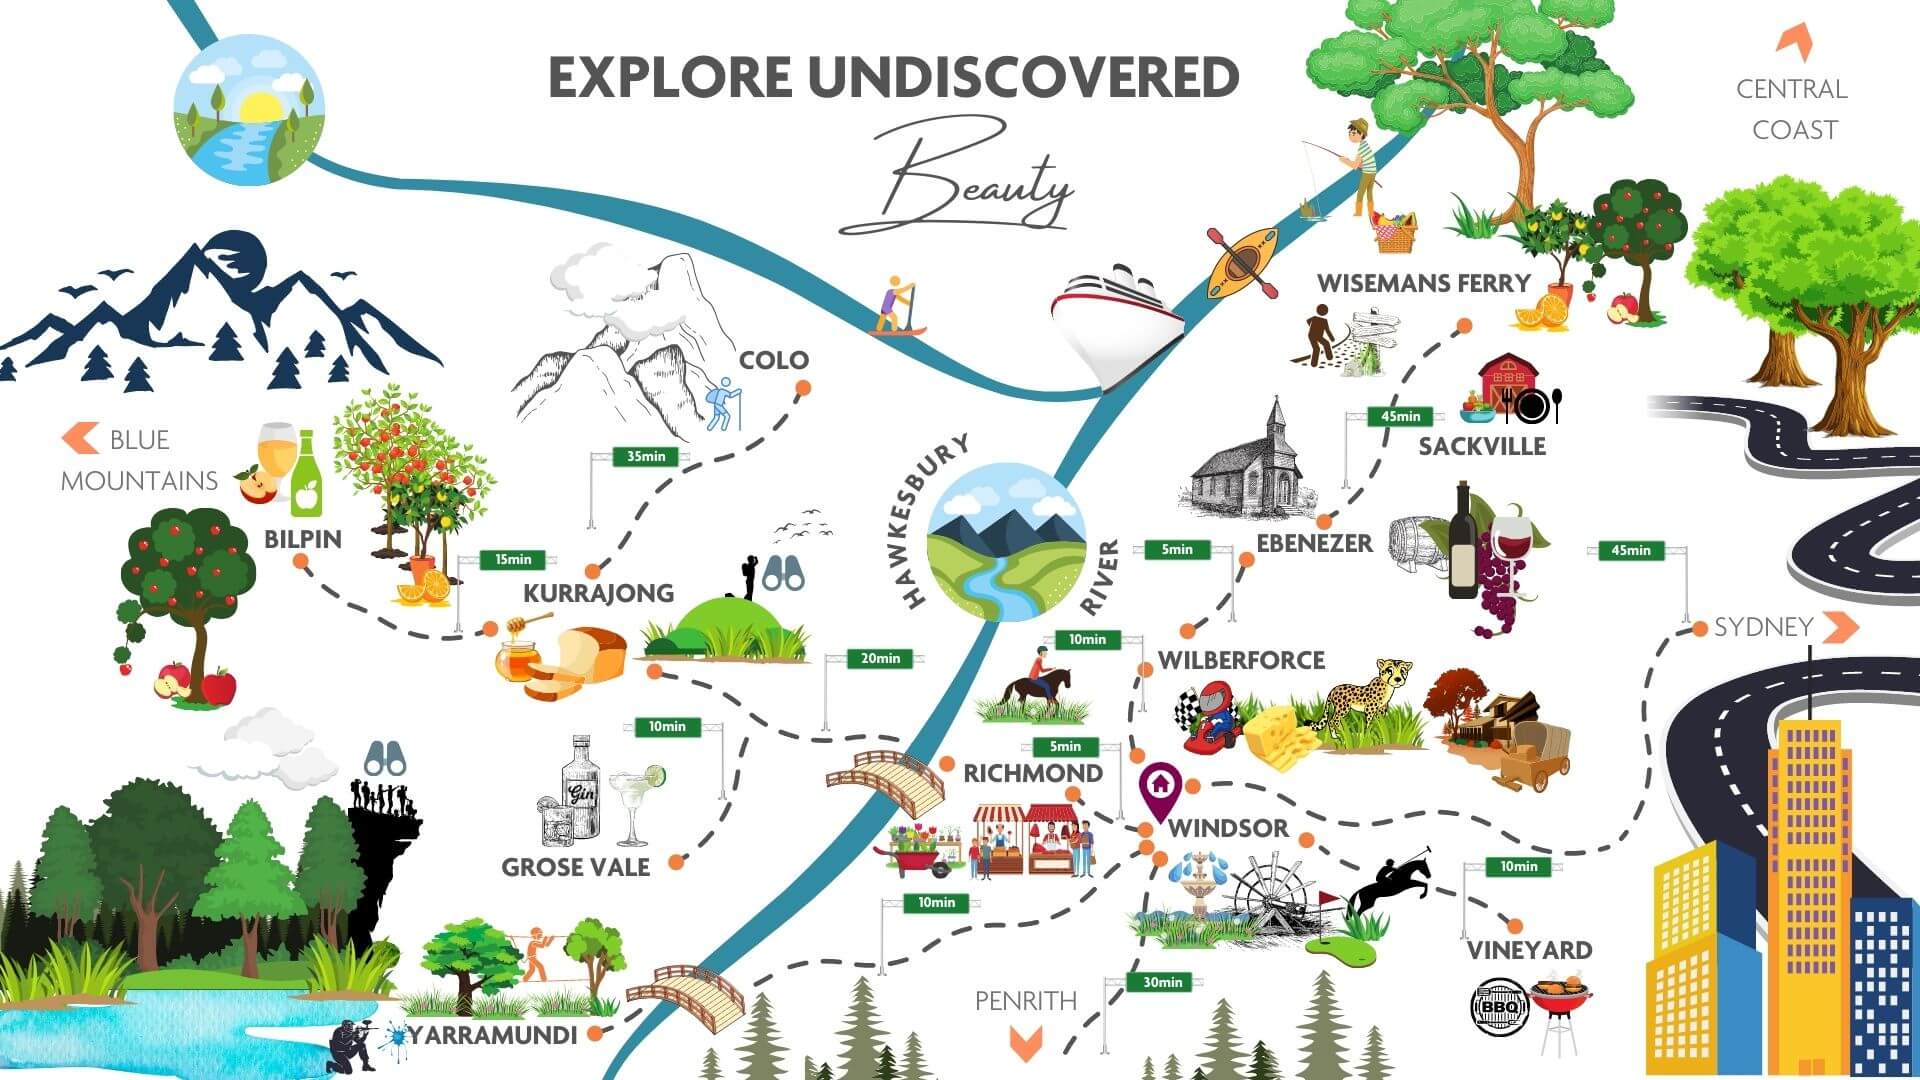 Hawkesbury attractions map infographic